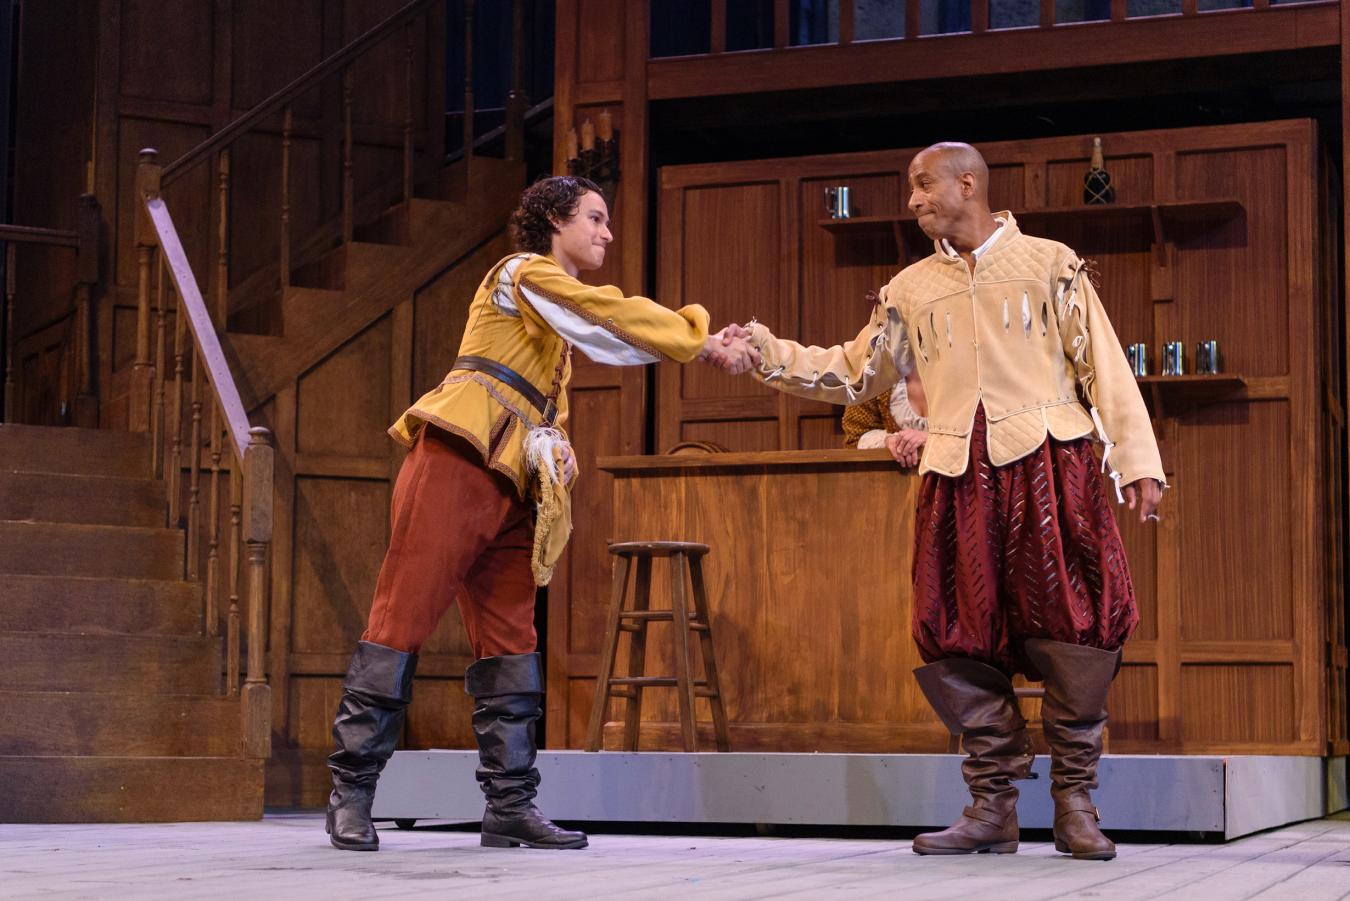 Actor and current student Dominic Gross performs on stage, shaking hands with another actor